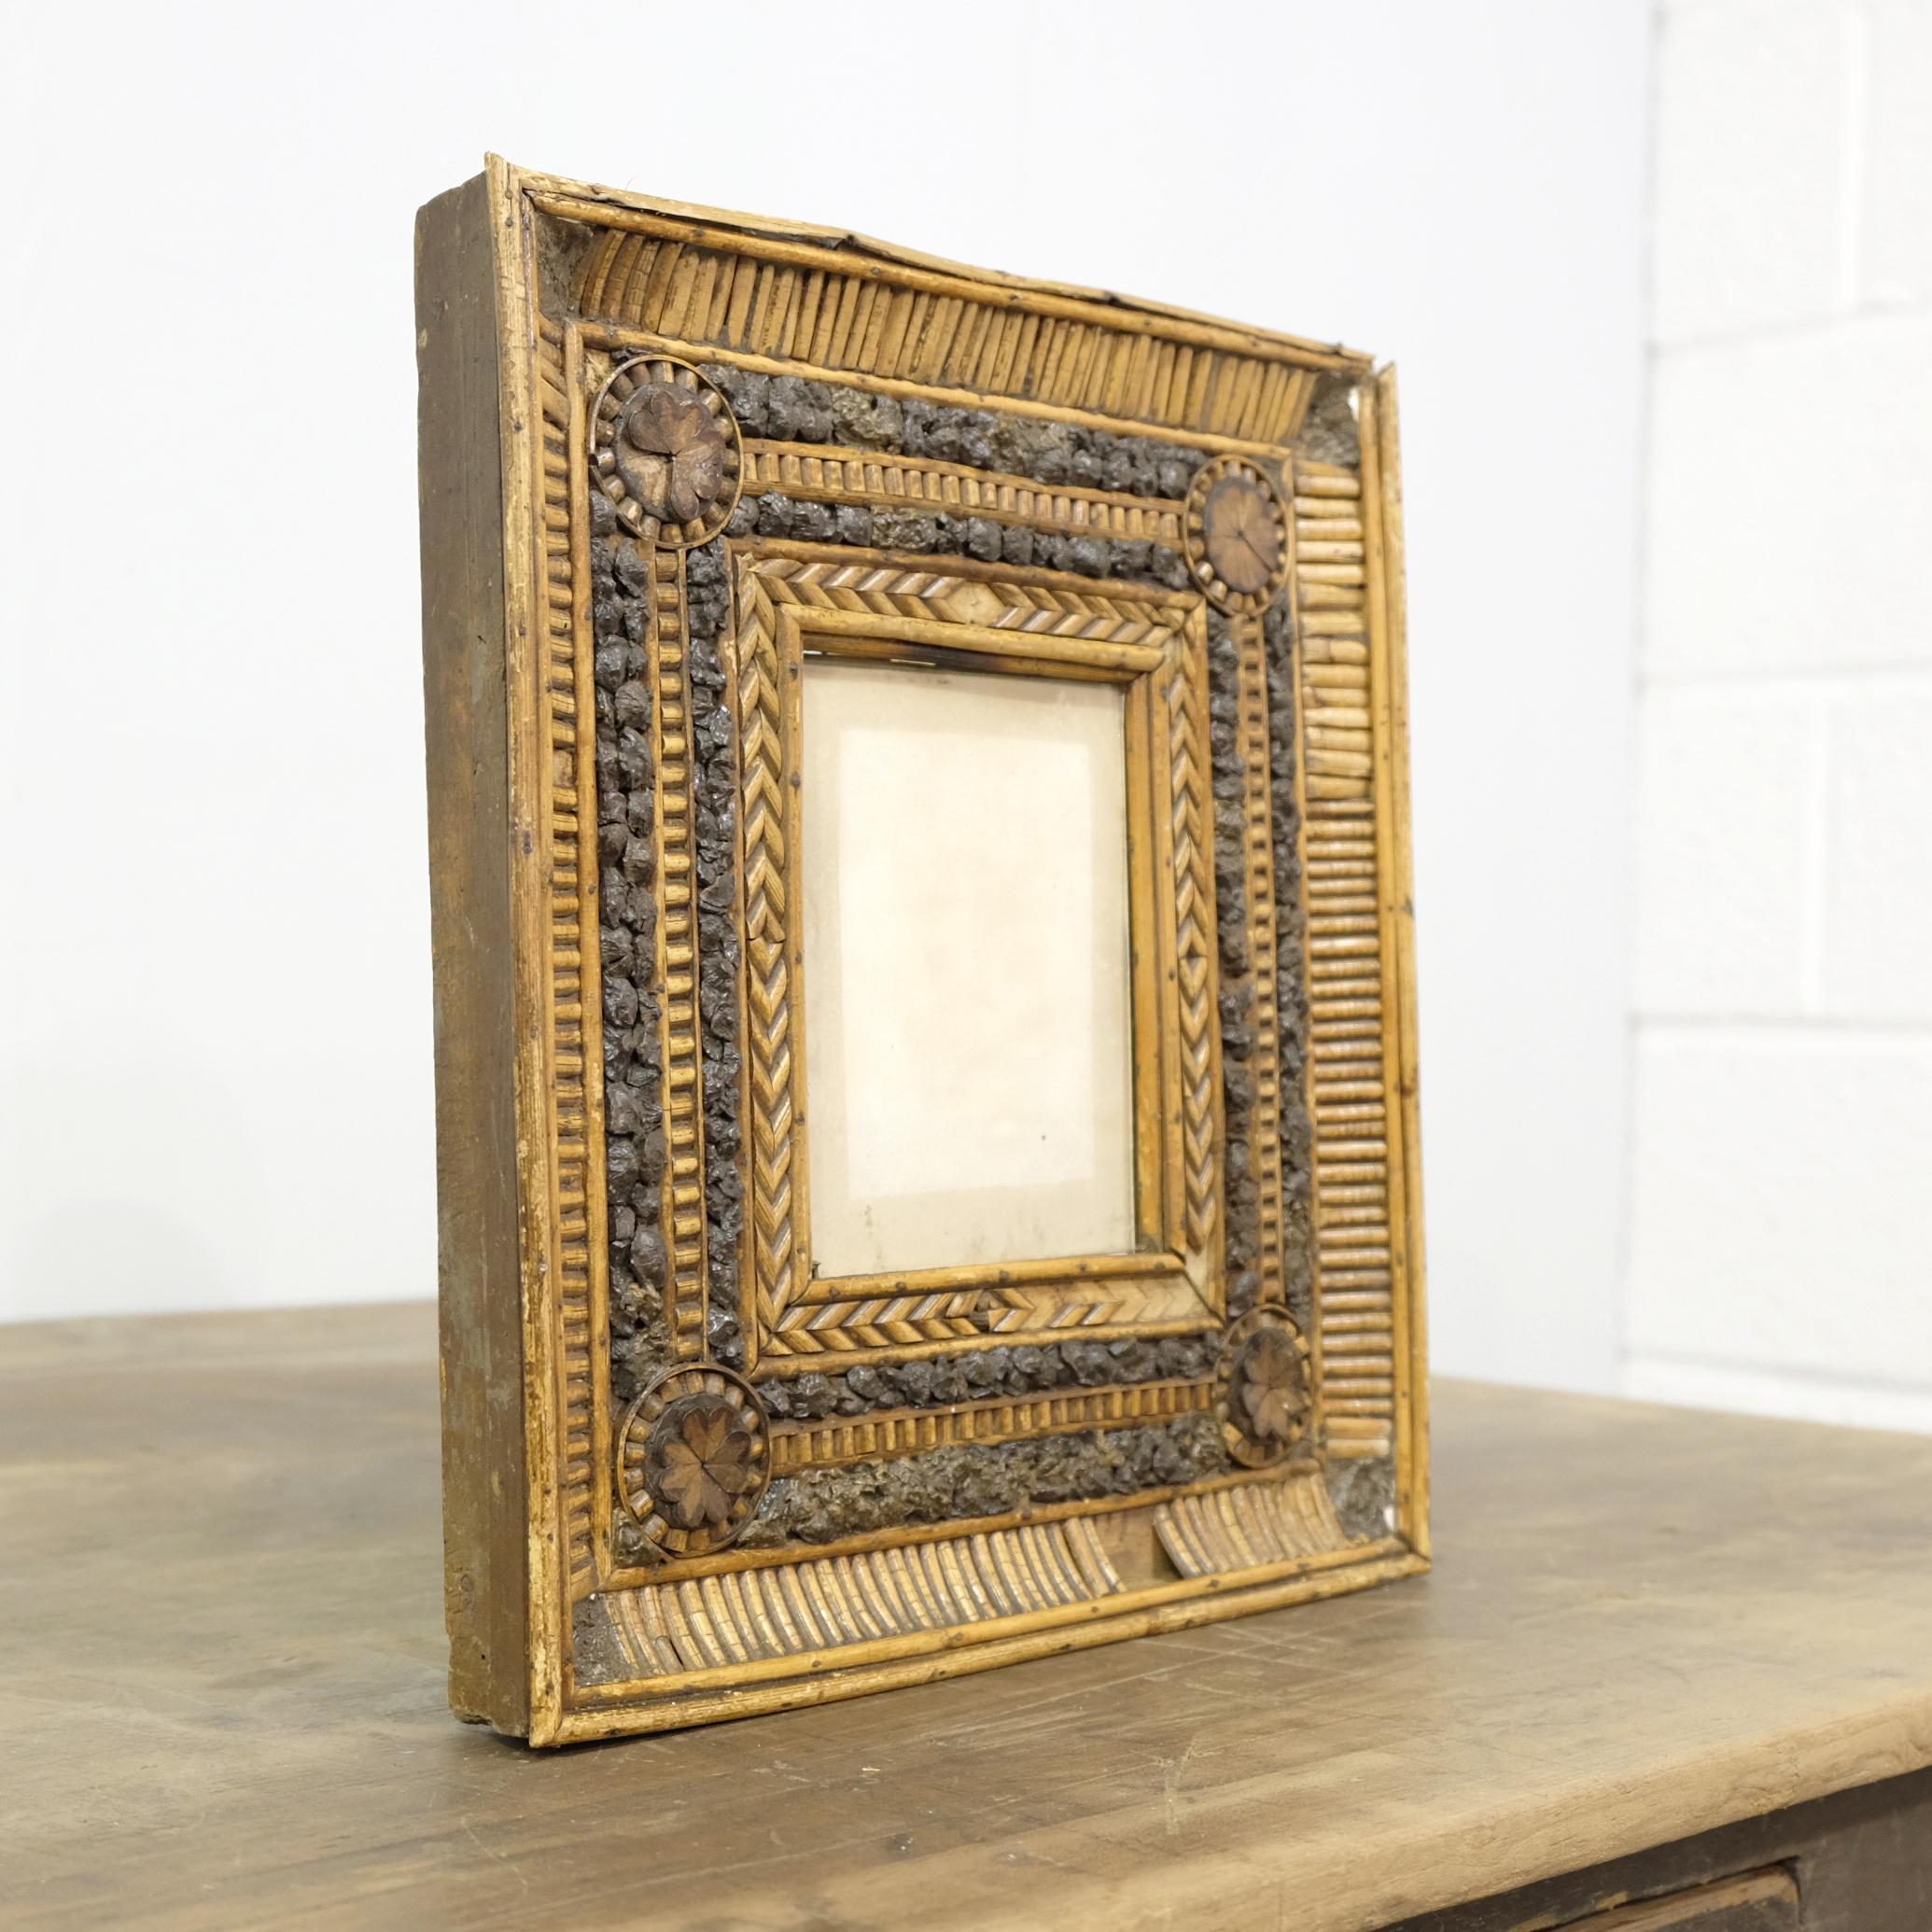 French Folk Art Twig and Bark Applied Decorative Picture Frame, 19th Century